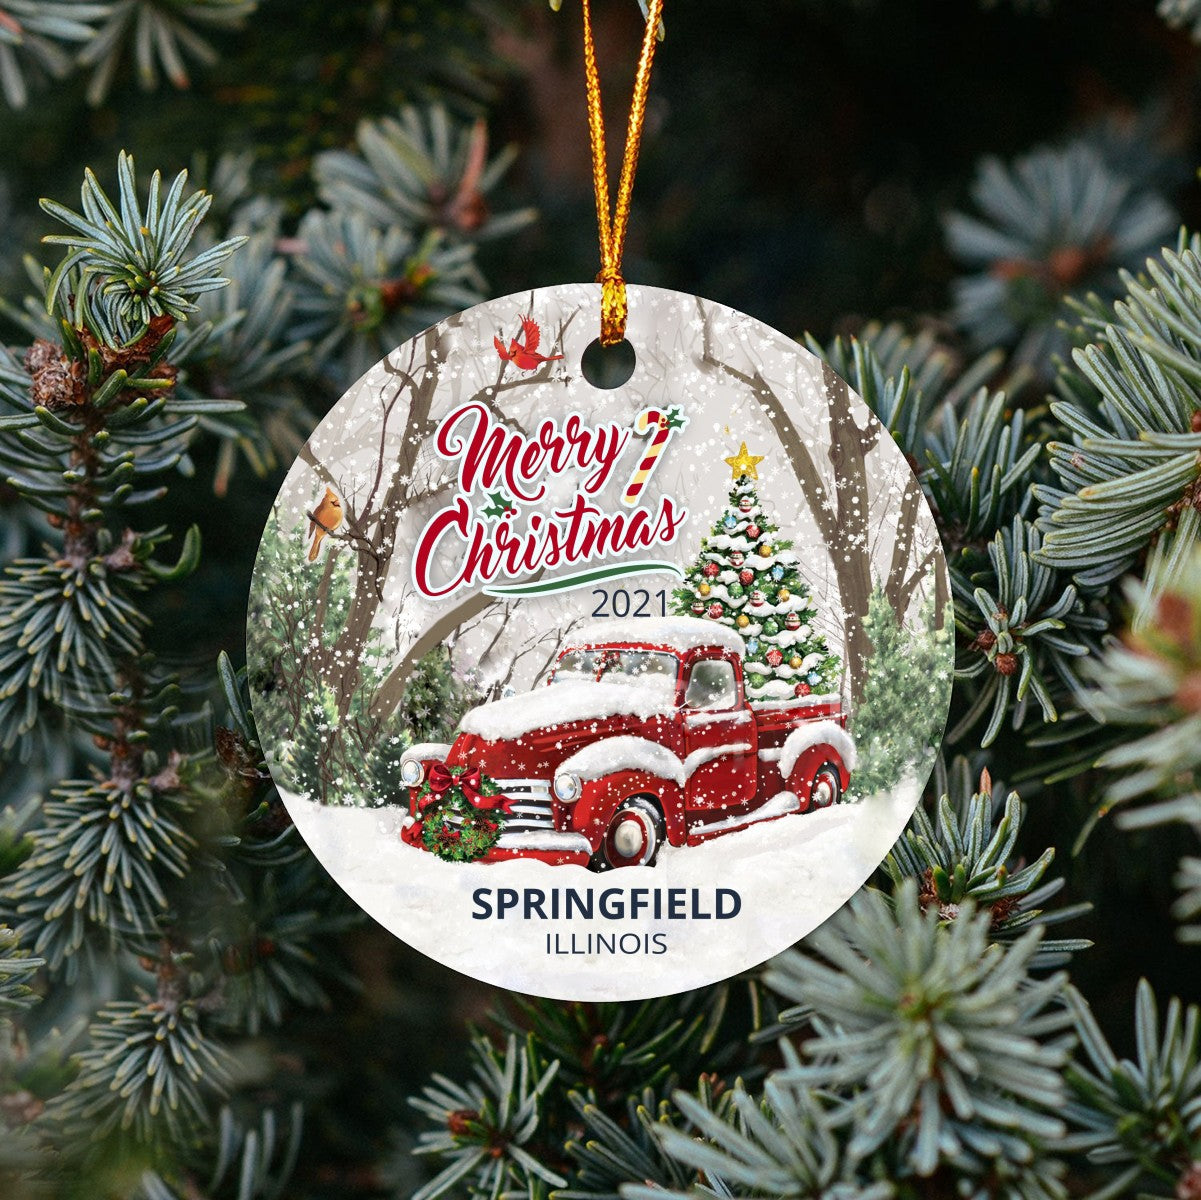 Christmas Tree Ornaments Springfield - Ornament Customize With Name City And State Springfield Illinois IL - Red Truck Xmas Ornaments 3'' Plastic Gift For Family, Friend And Housewarming